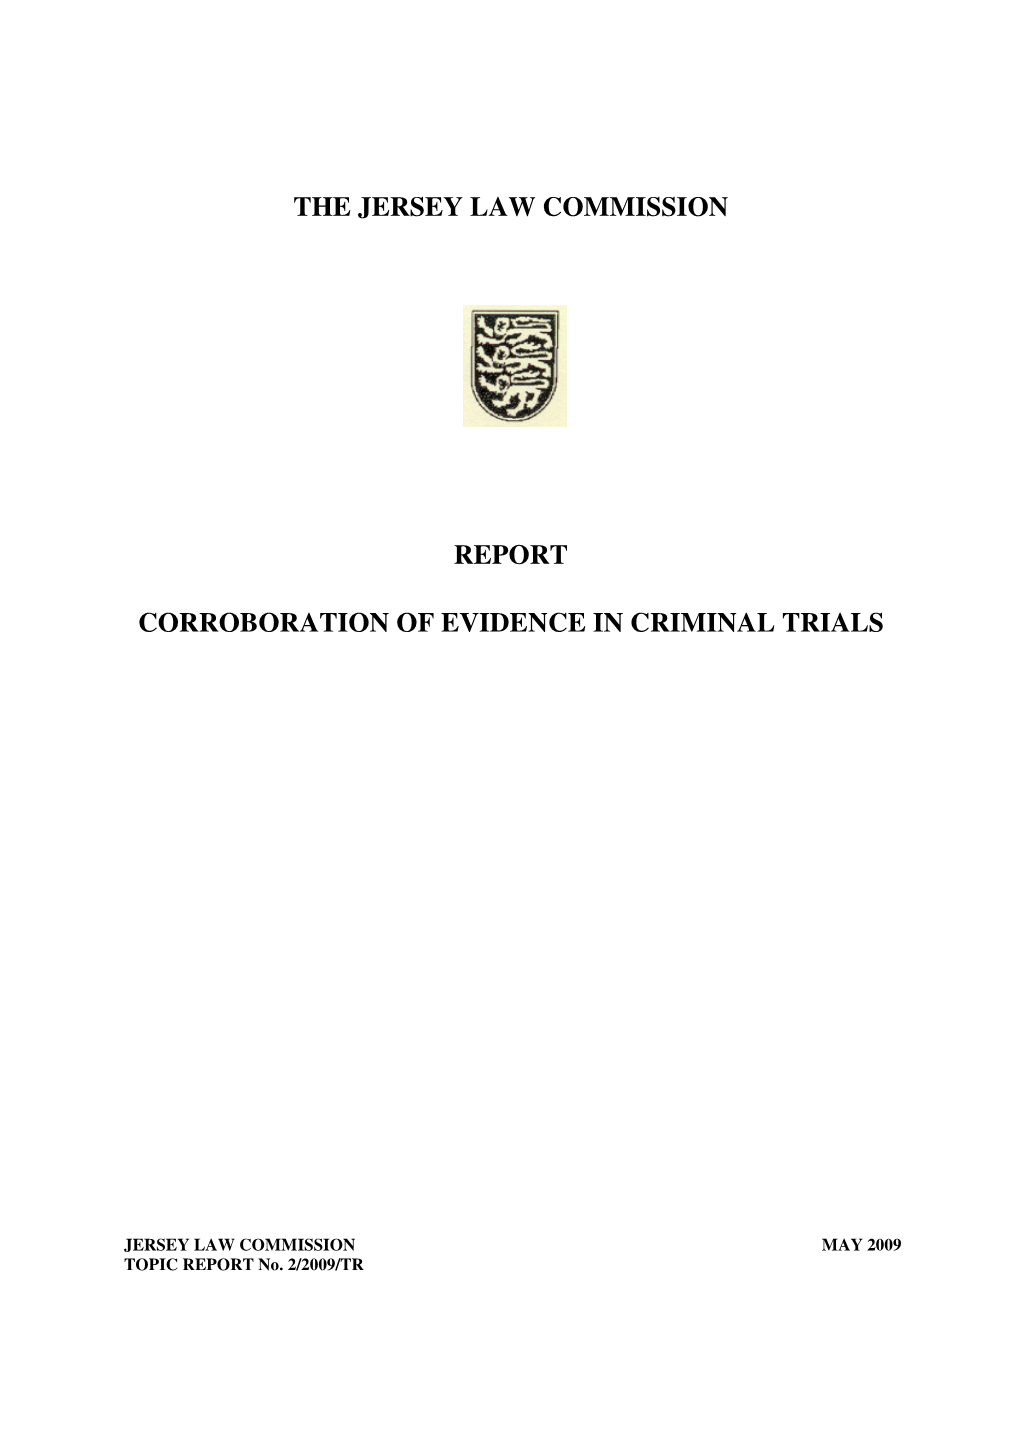 The Jersey Law Commission Report Corroboration of Evidence in Criminal Trials